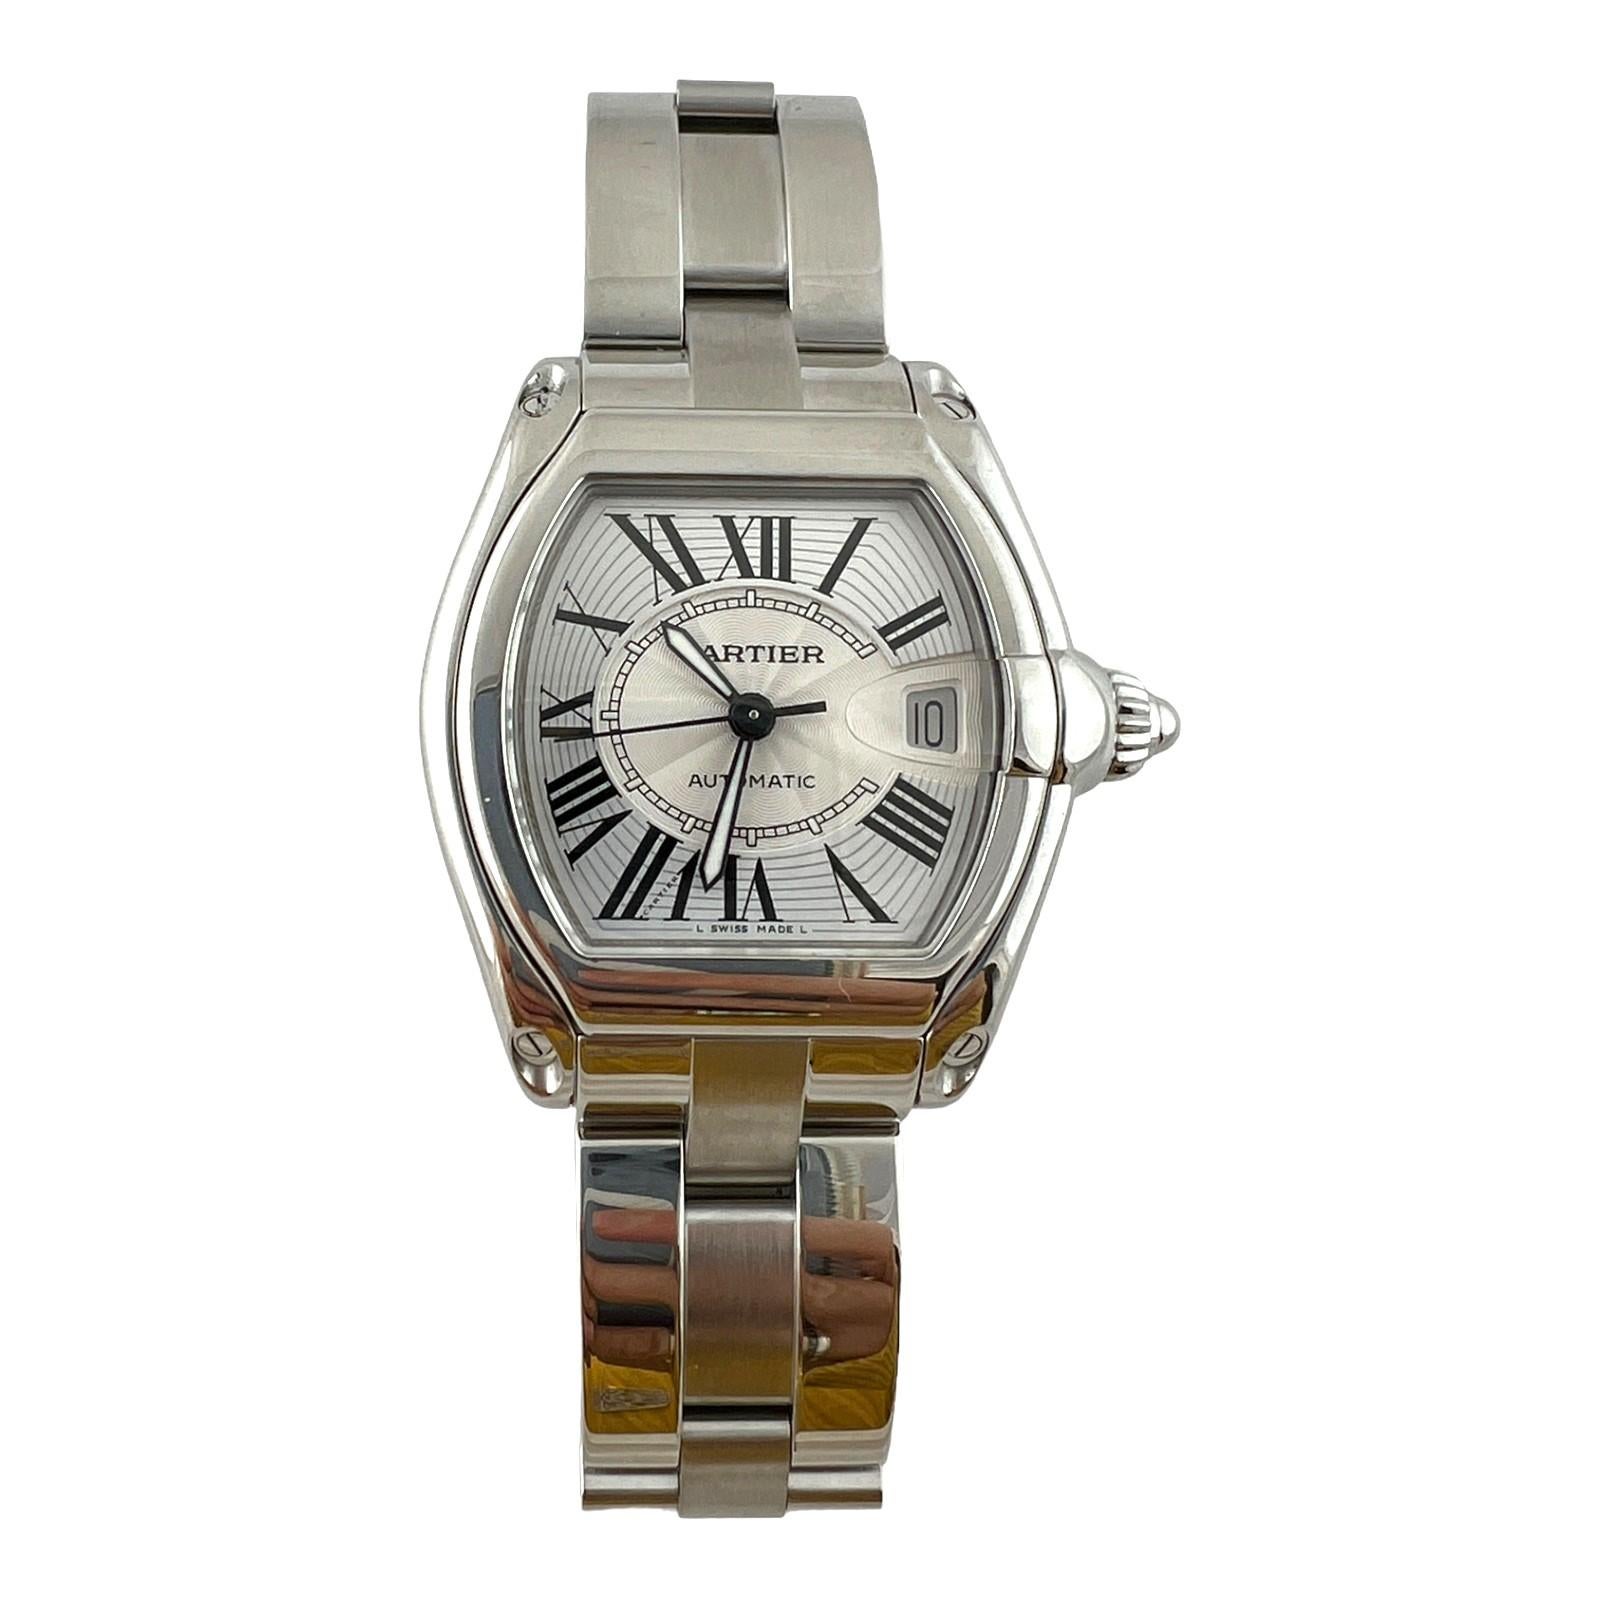 Cartier Roadster Watch - Large

Model: 2510 / W62025V3
Serial: 451355NX

This classic Cartier watch is set in stainless steel with an automatic movement

Silver dial with black roman markers

Date

Case is approx. 39mm wide x 44mm long. 10mm